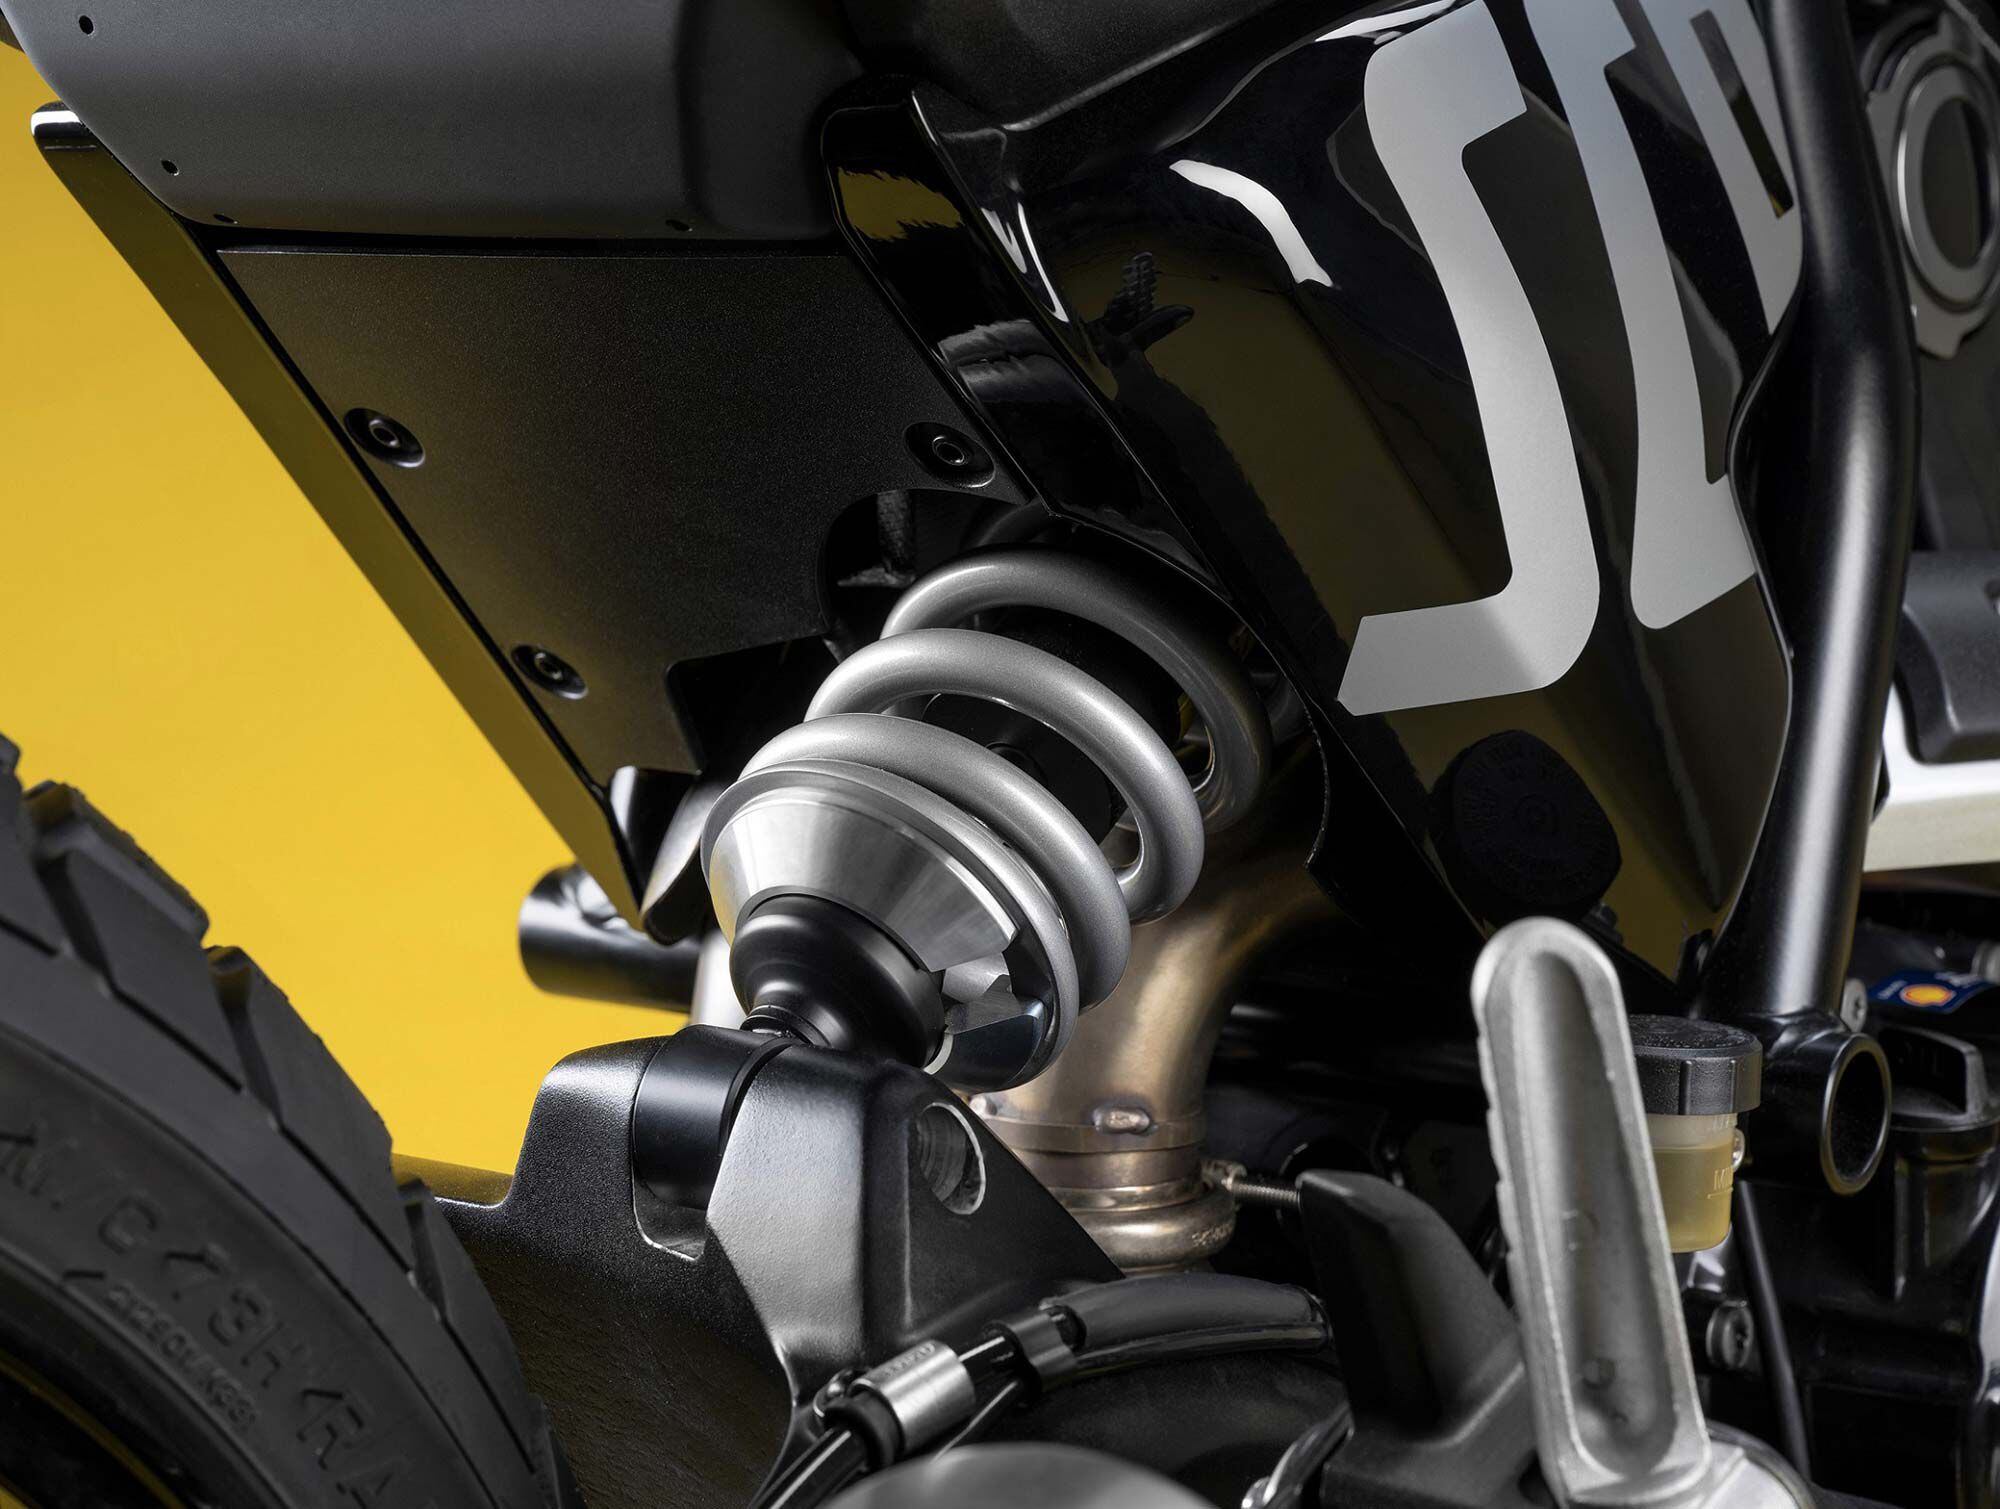 The swingarm is redesigned with the rear shock moving closer to the bike center; the rear subframe is now removable.